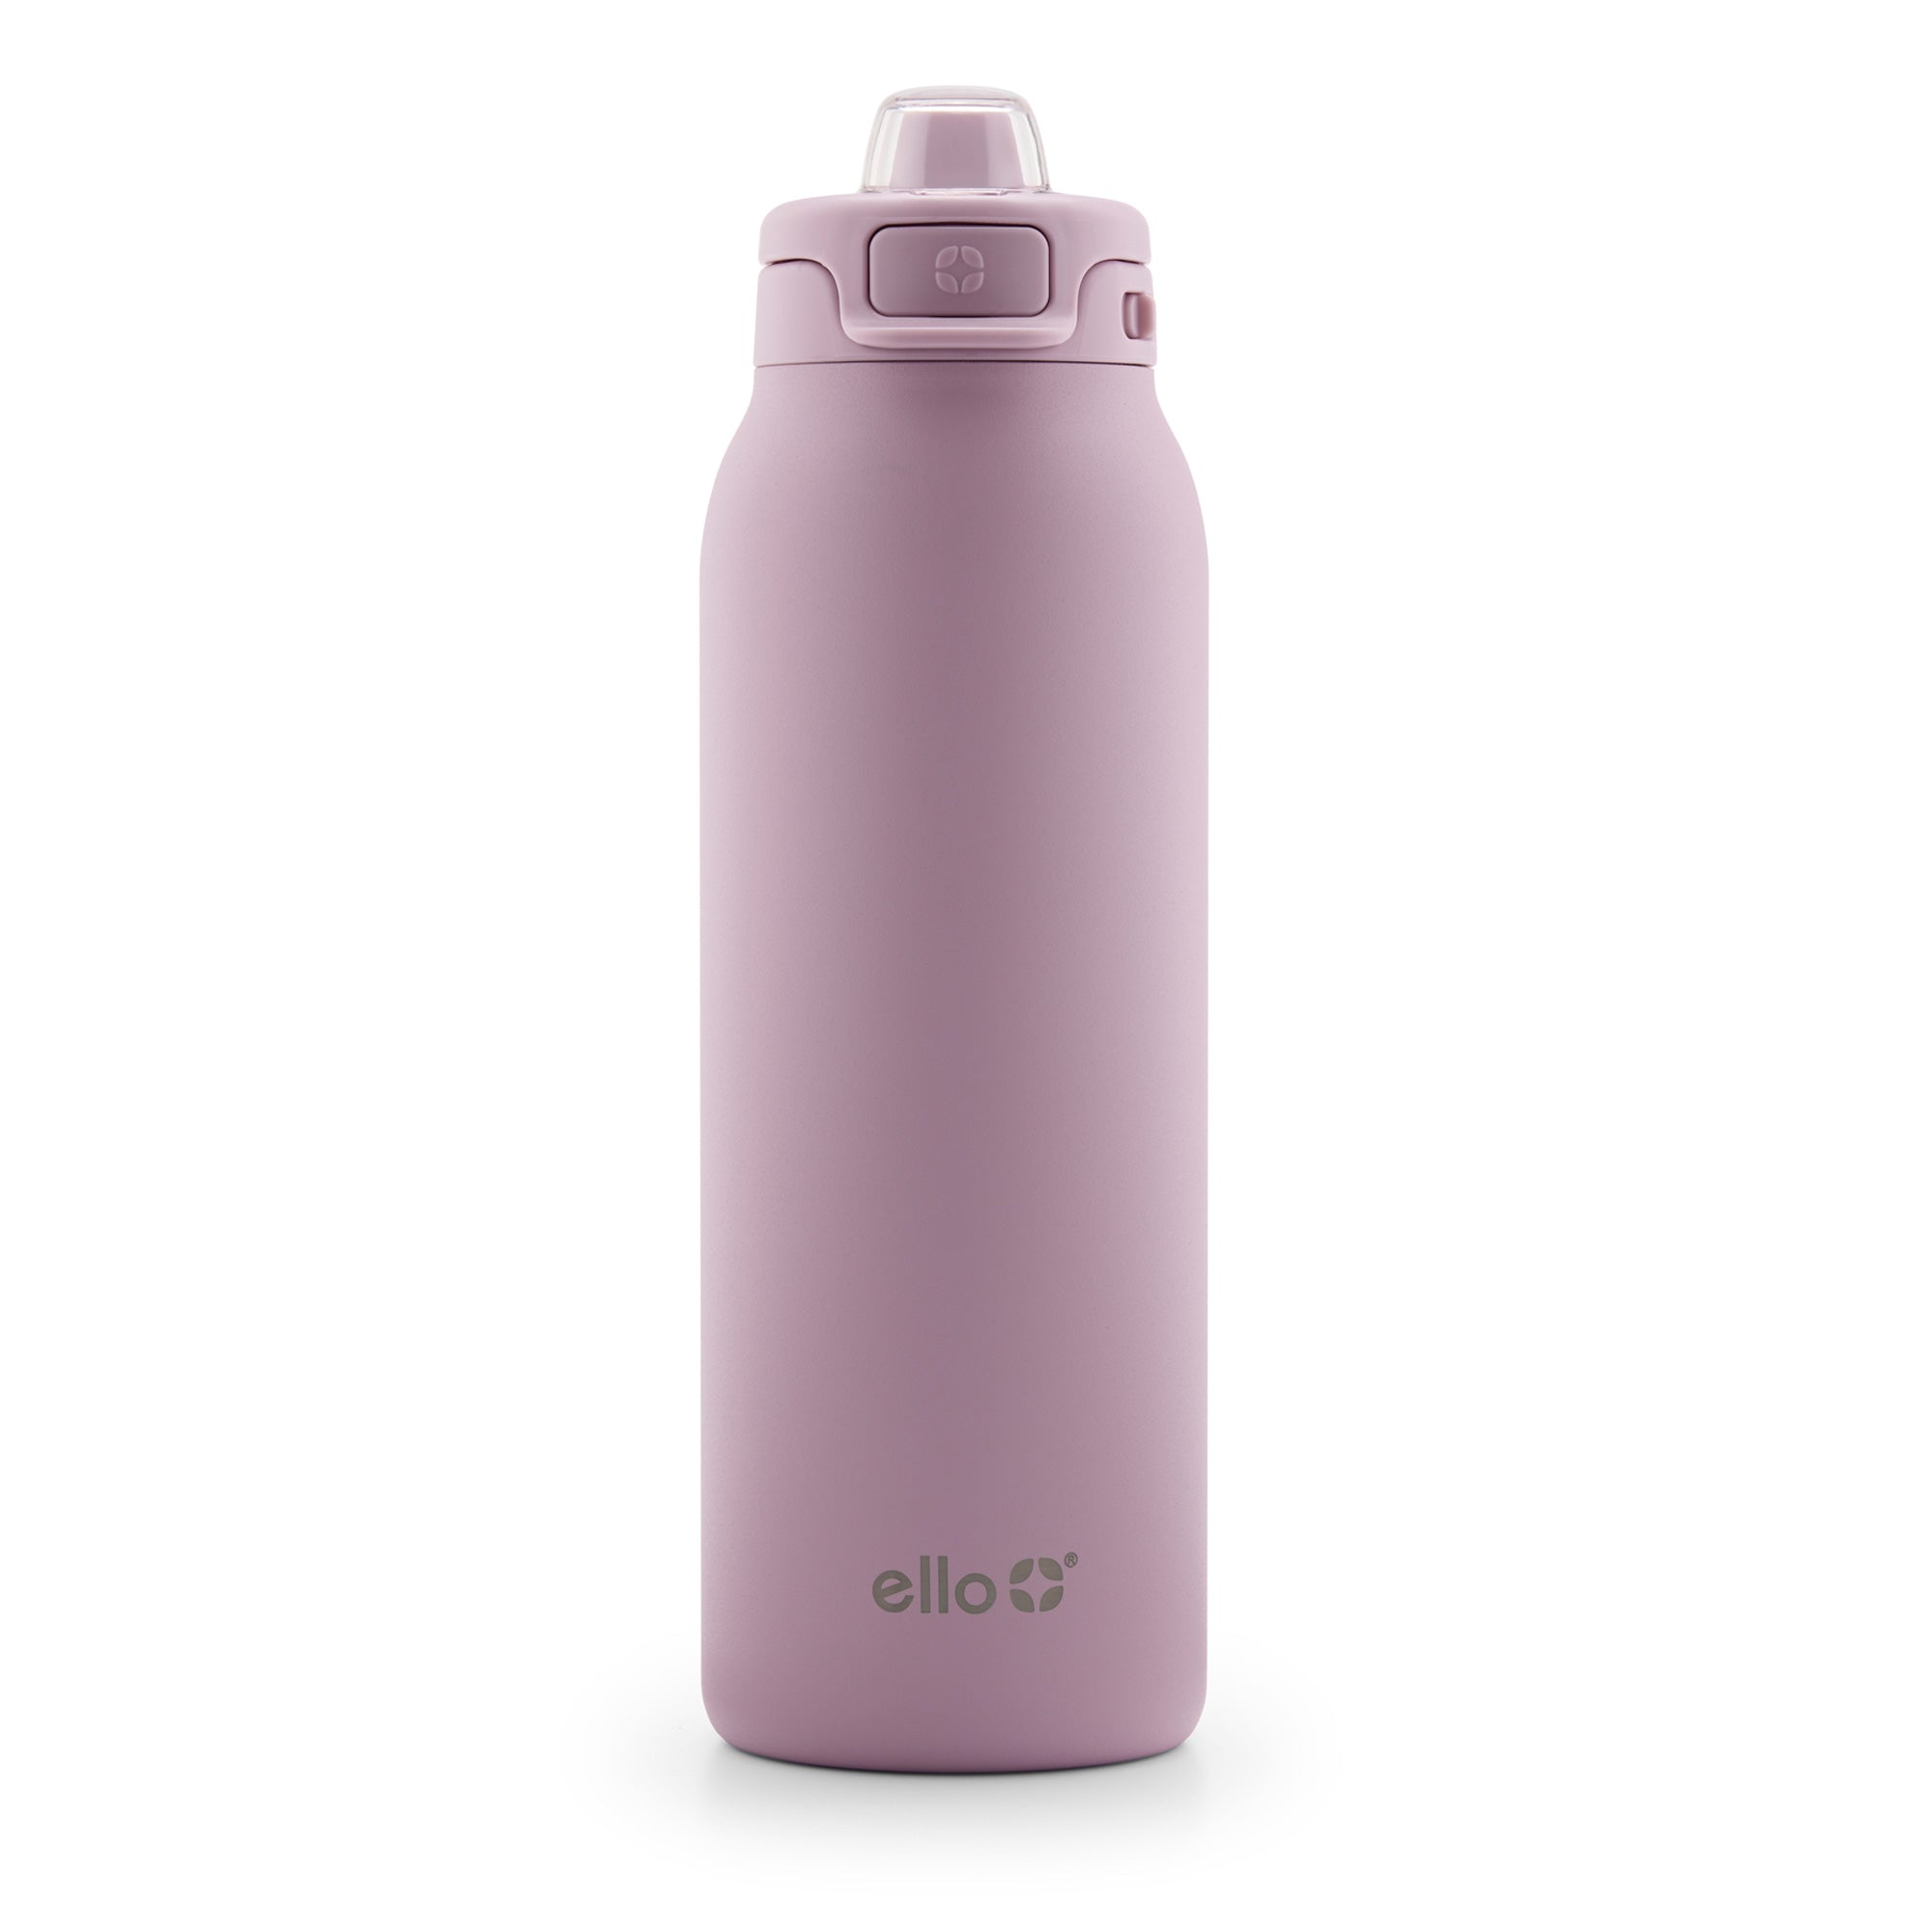 Ello Max Kids Vacuum Insulated Stainless Steel Water Bottle with Silicon  Sleeve, 12 oz, Mint/Purple